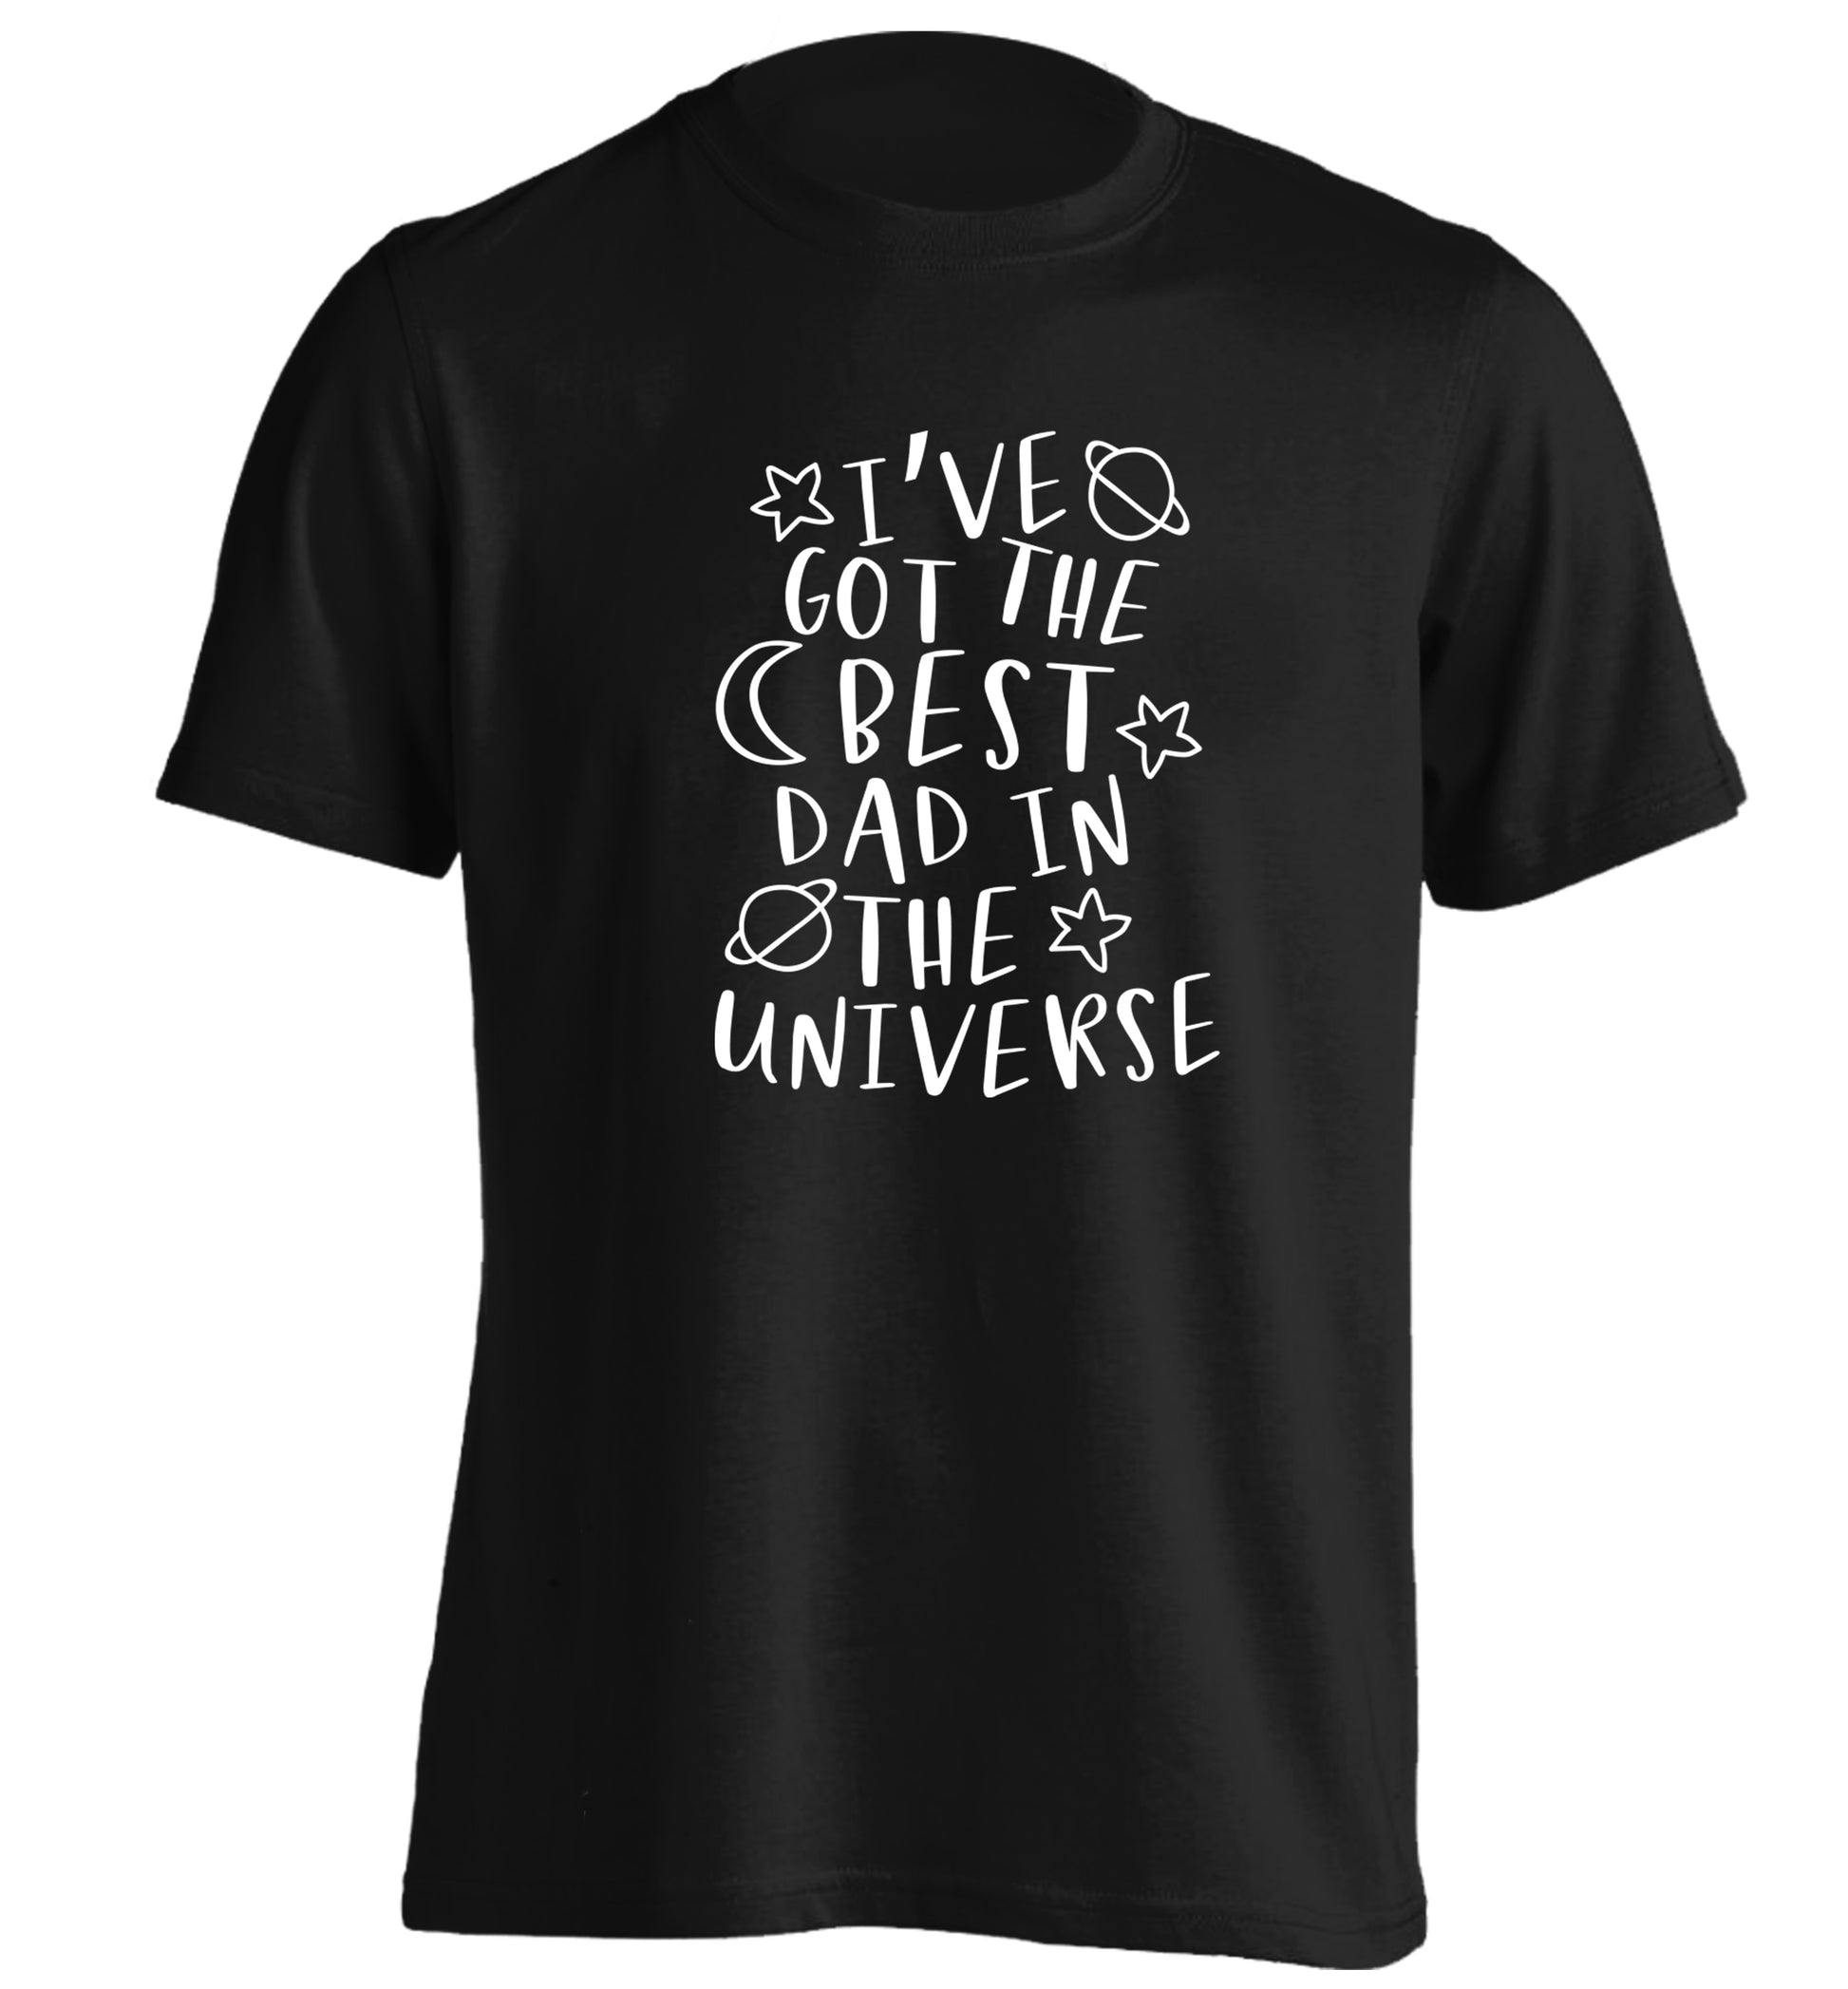 I've got the best dad in the universe adults unisex black Tshirt 2XL